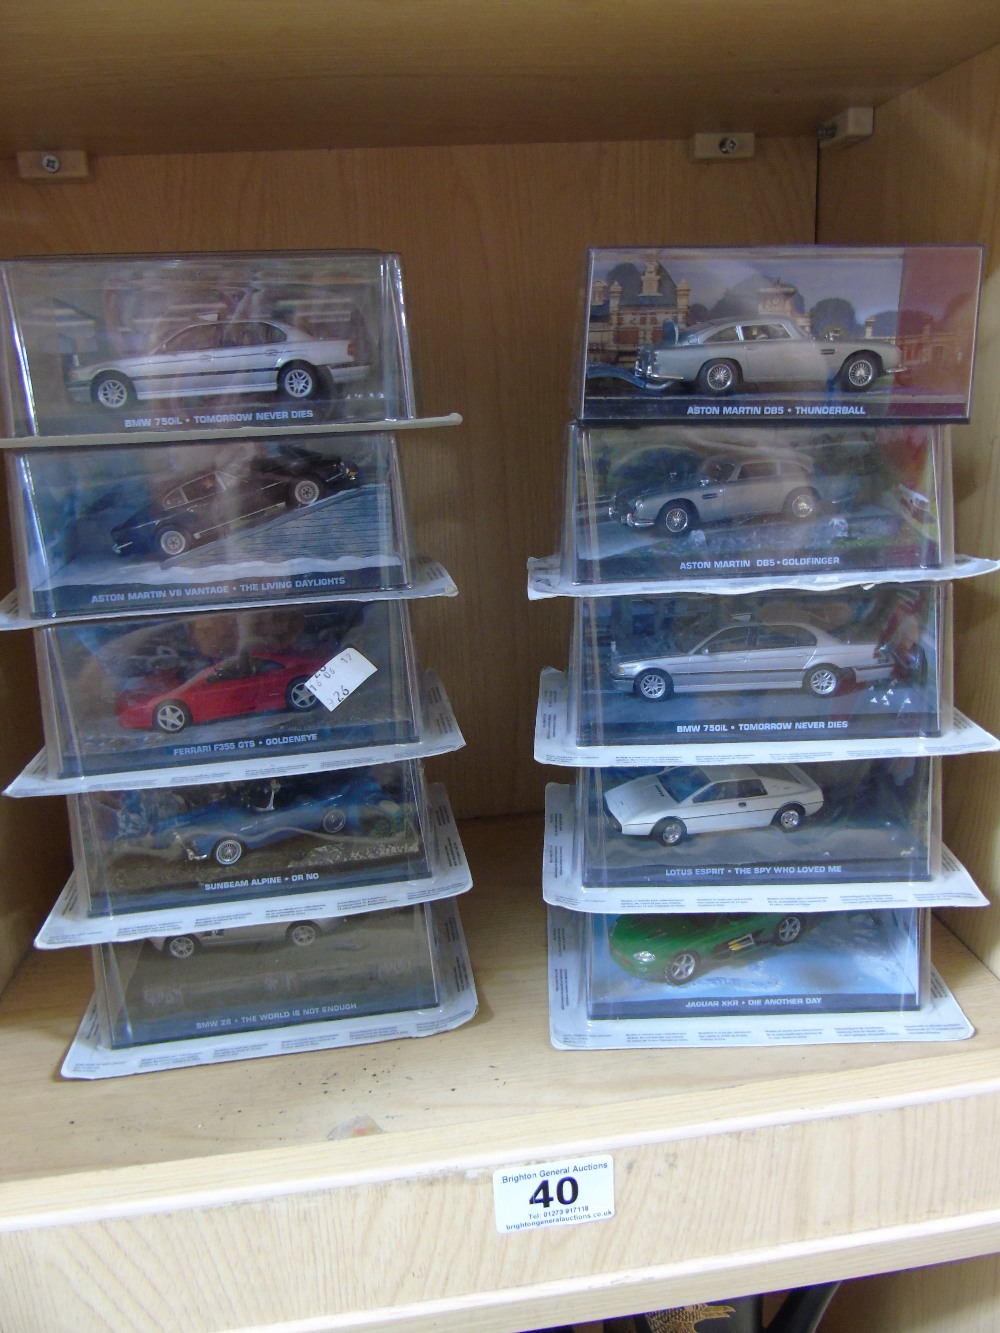 10 BOXED VEHICLES INCLUDING JAMES BOND 007